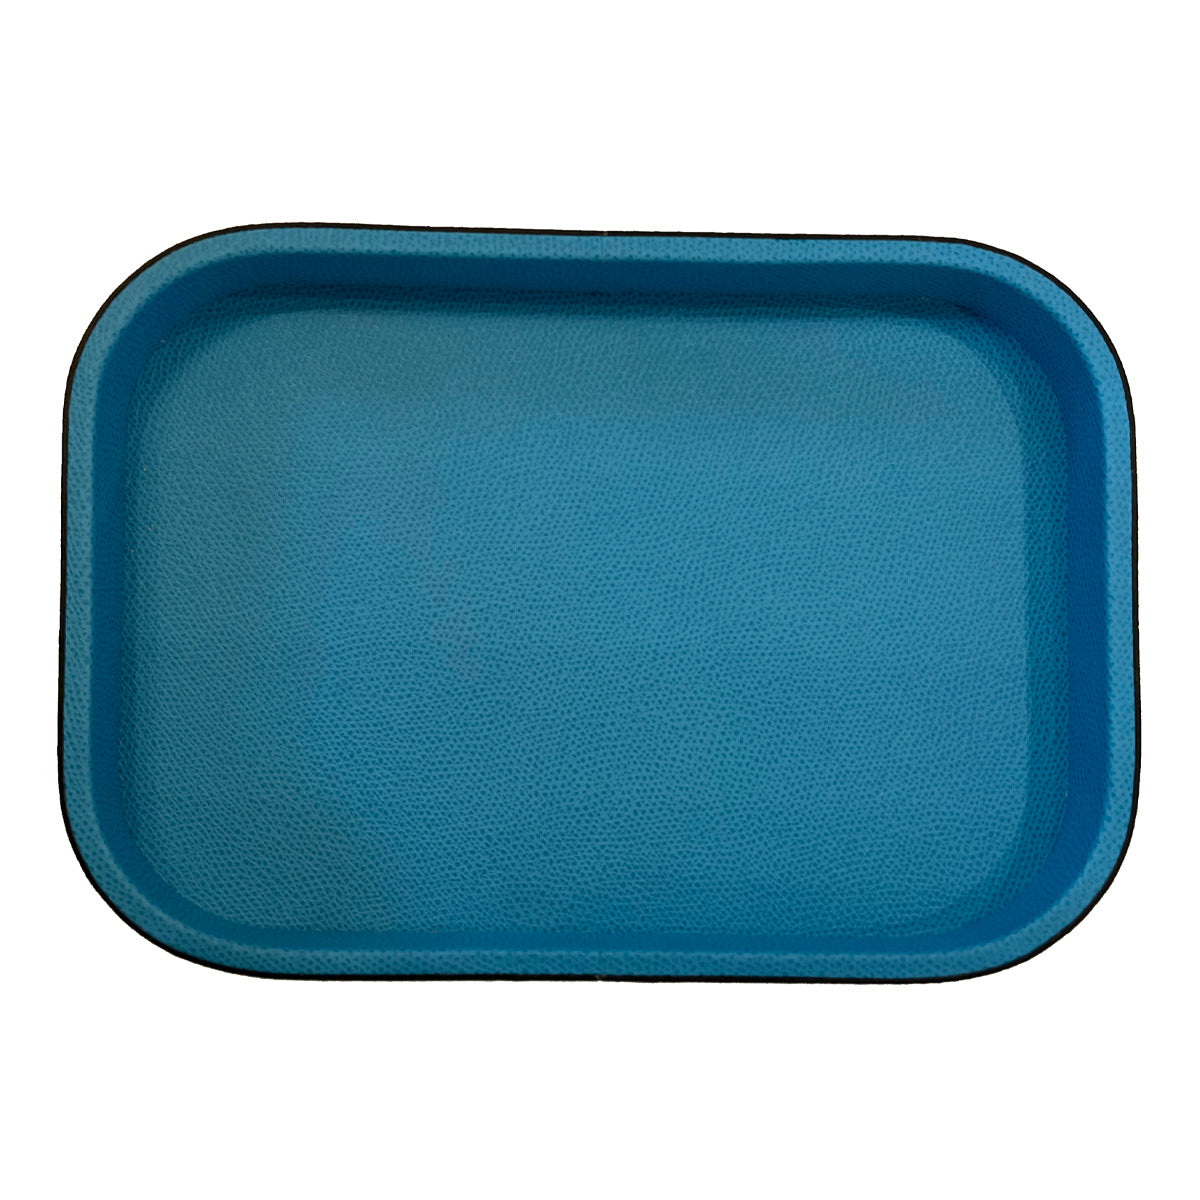 Turquoise Polo Valet Tray